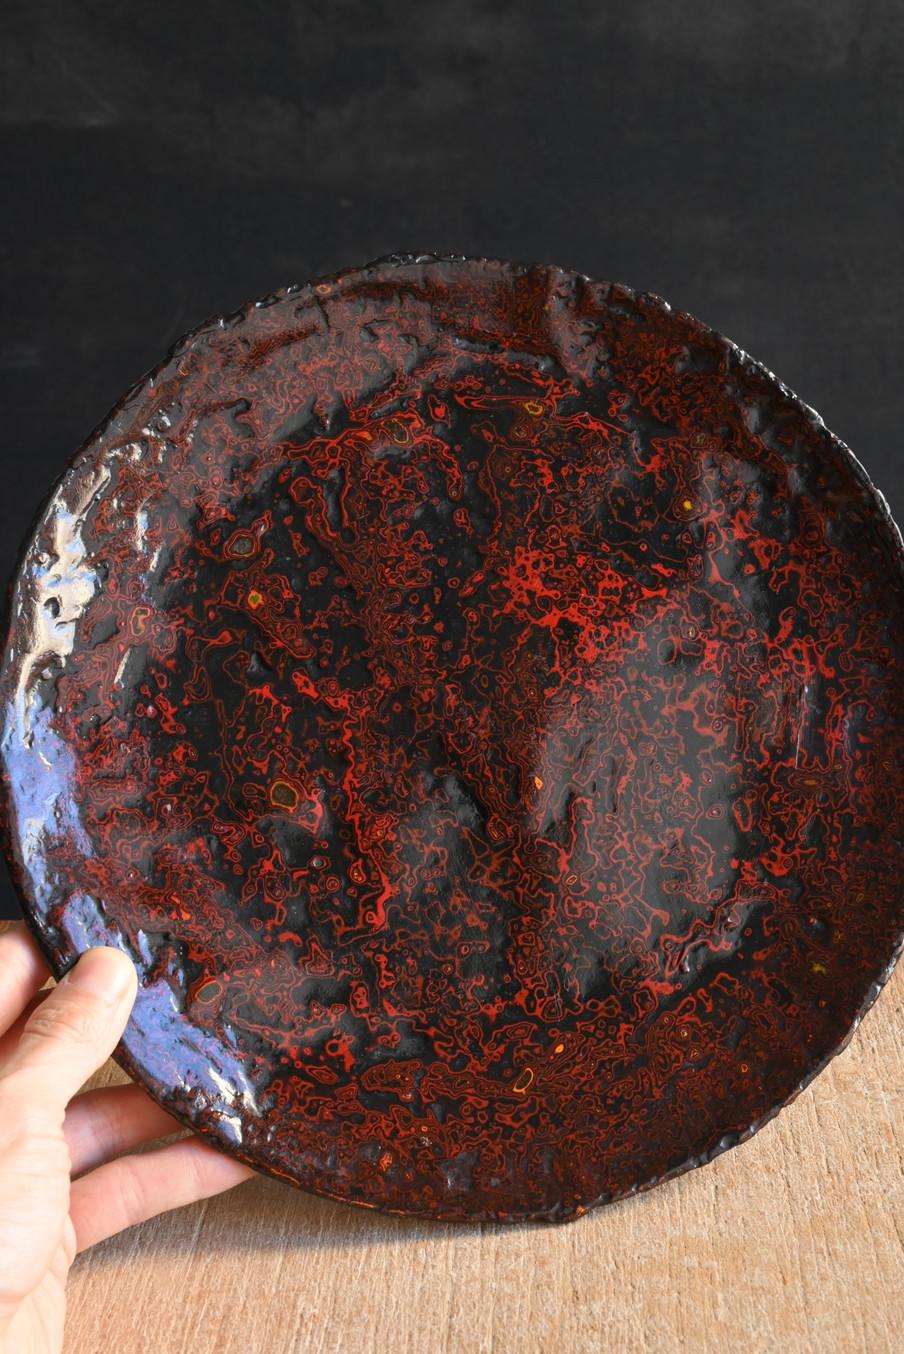 This is an old tray used by Japanese lacquerware craftsmen.
It is thought that this tray was used to mix colors when applying lacquer.
Probably from the 1900s to the 1960s.

After this tray was no longer in use, someone else polished the surface and